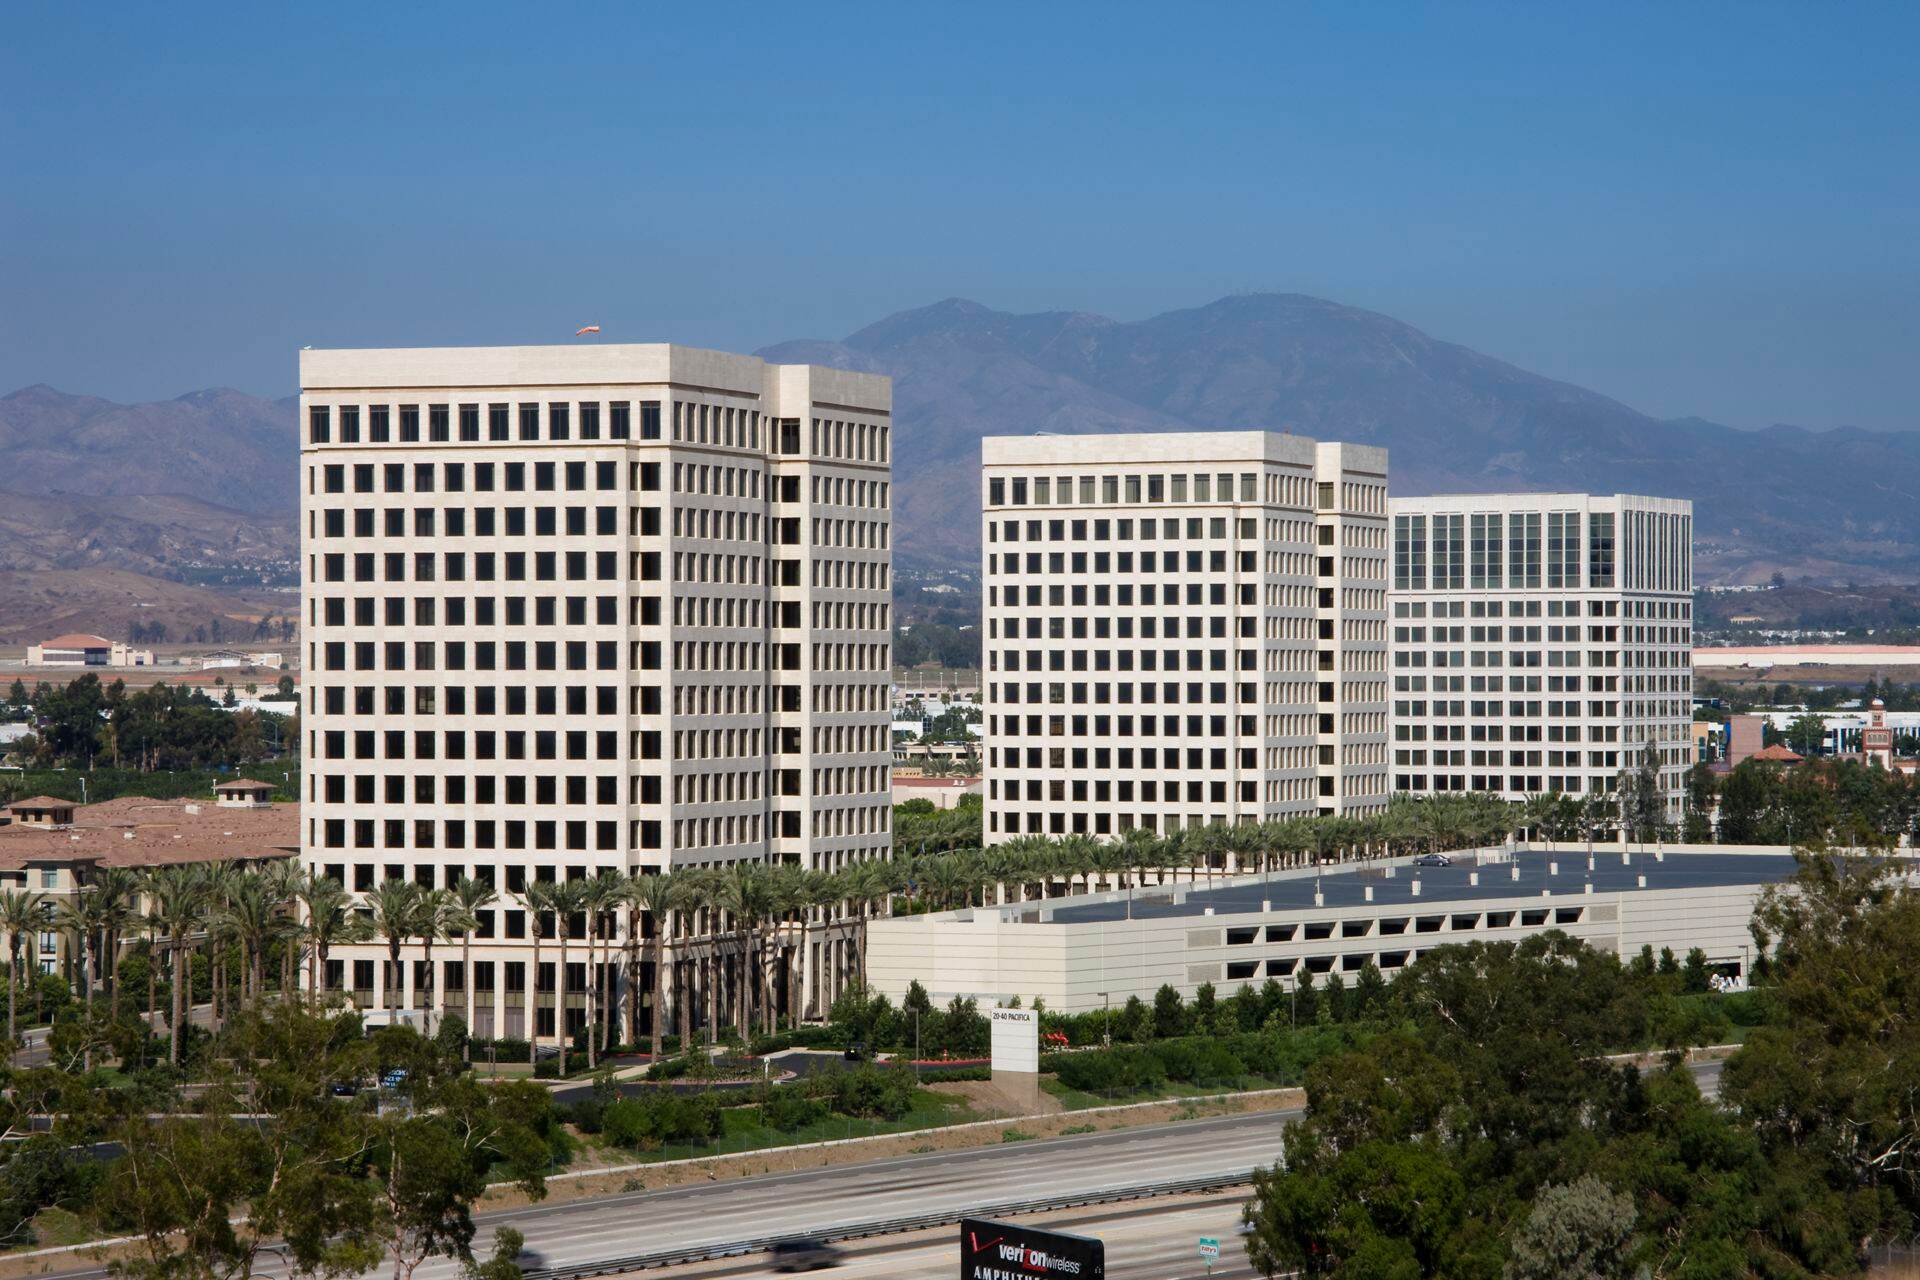 Exterior views of 20-40 Pacifica Office Towers and surroundings. Moore - RMA Architectural Photographers 2008..